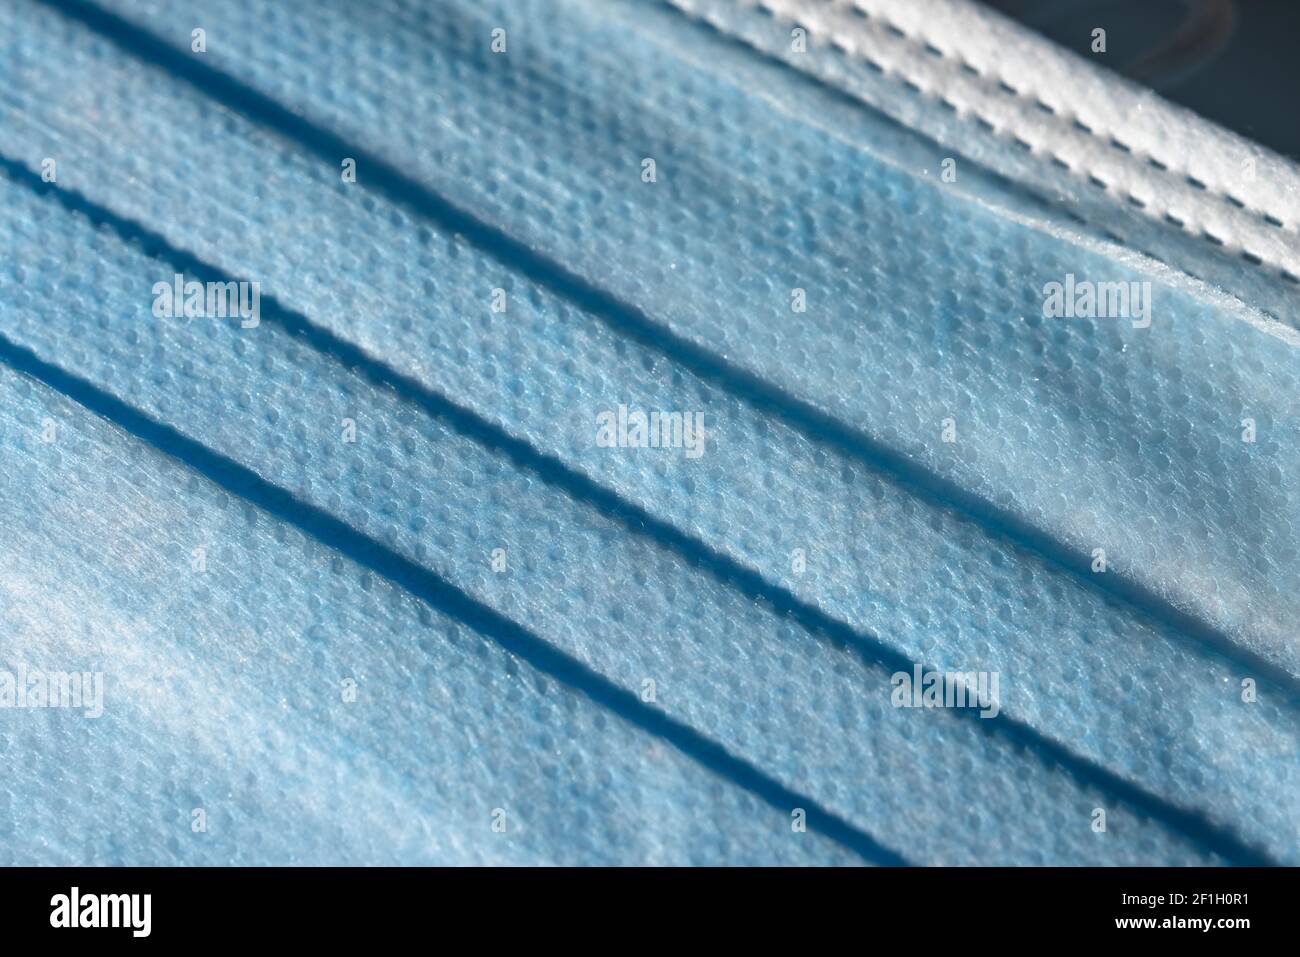 Close up of the front blue surface of a medical or surgical face mask. Man made single use item of Personal protective equipment, plastic texture. Stock Photo